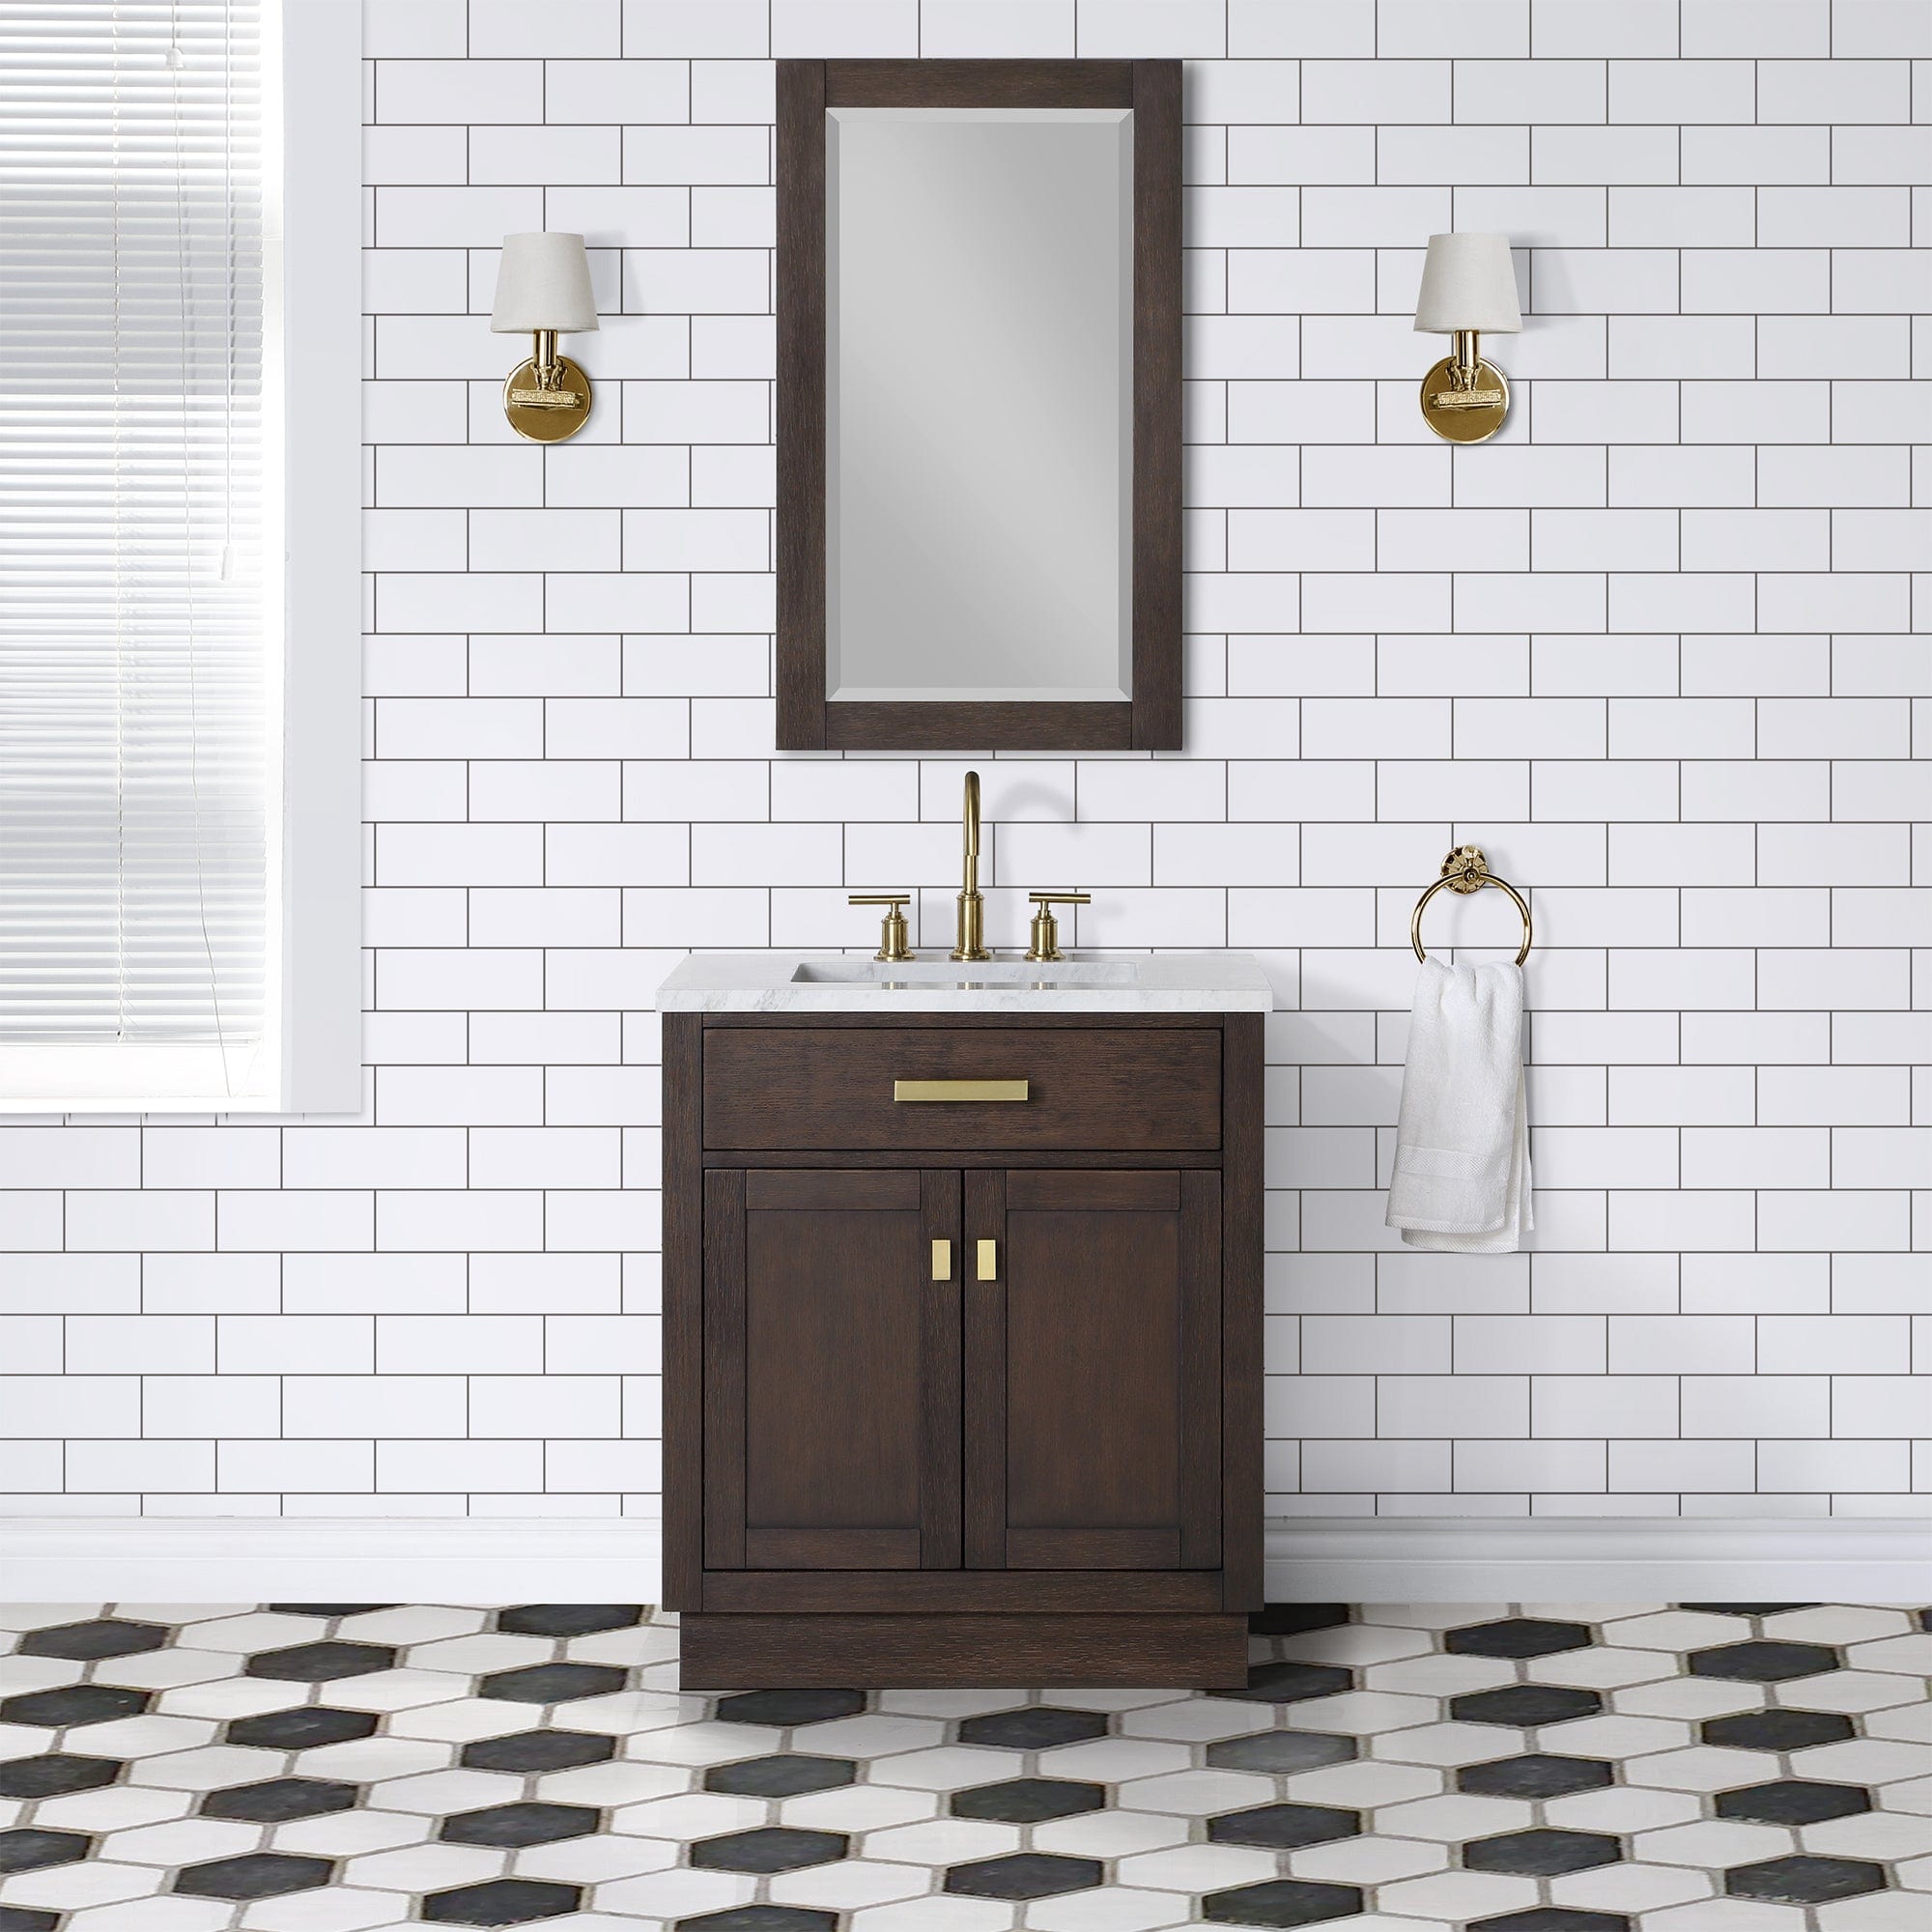 Chestnut 30 In. Single Sink Carrara White Marble Countertop Vanity In Brown Oak with Mirror - Molaix732030764644CH30CW06BK-R21000000